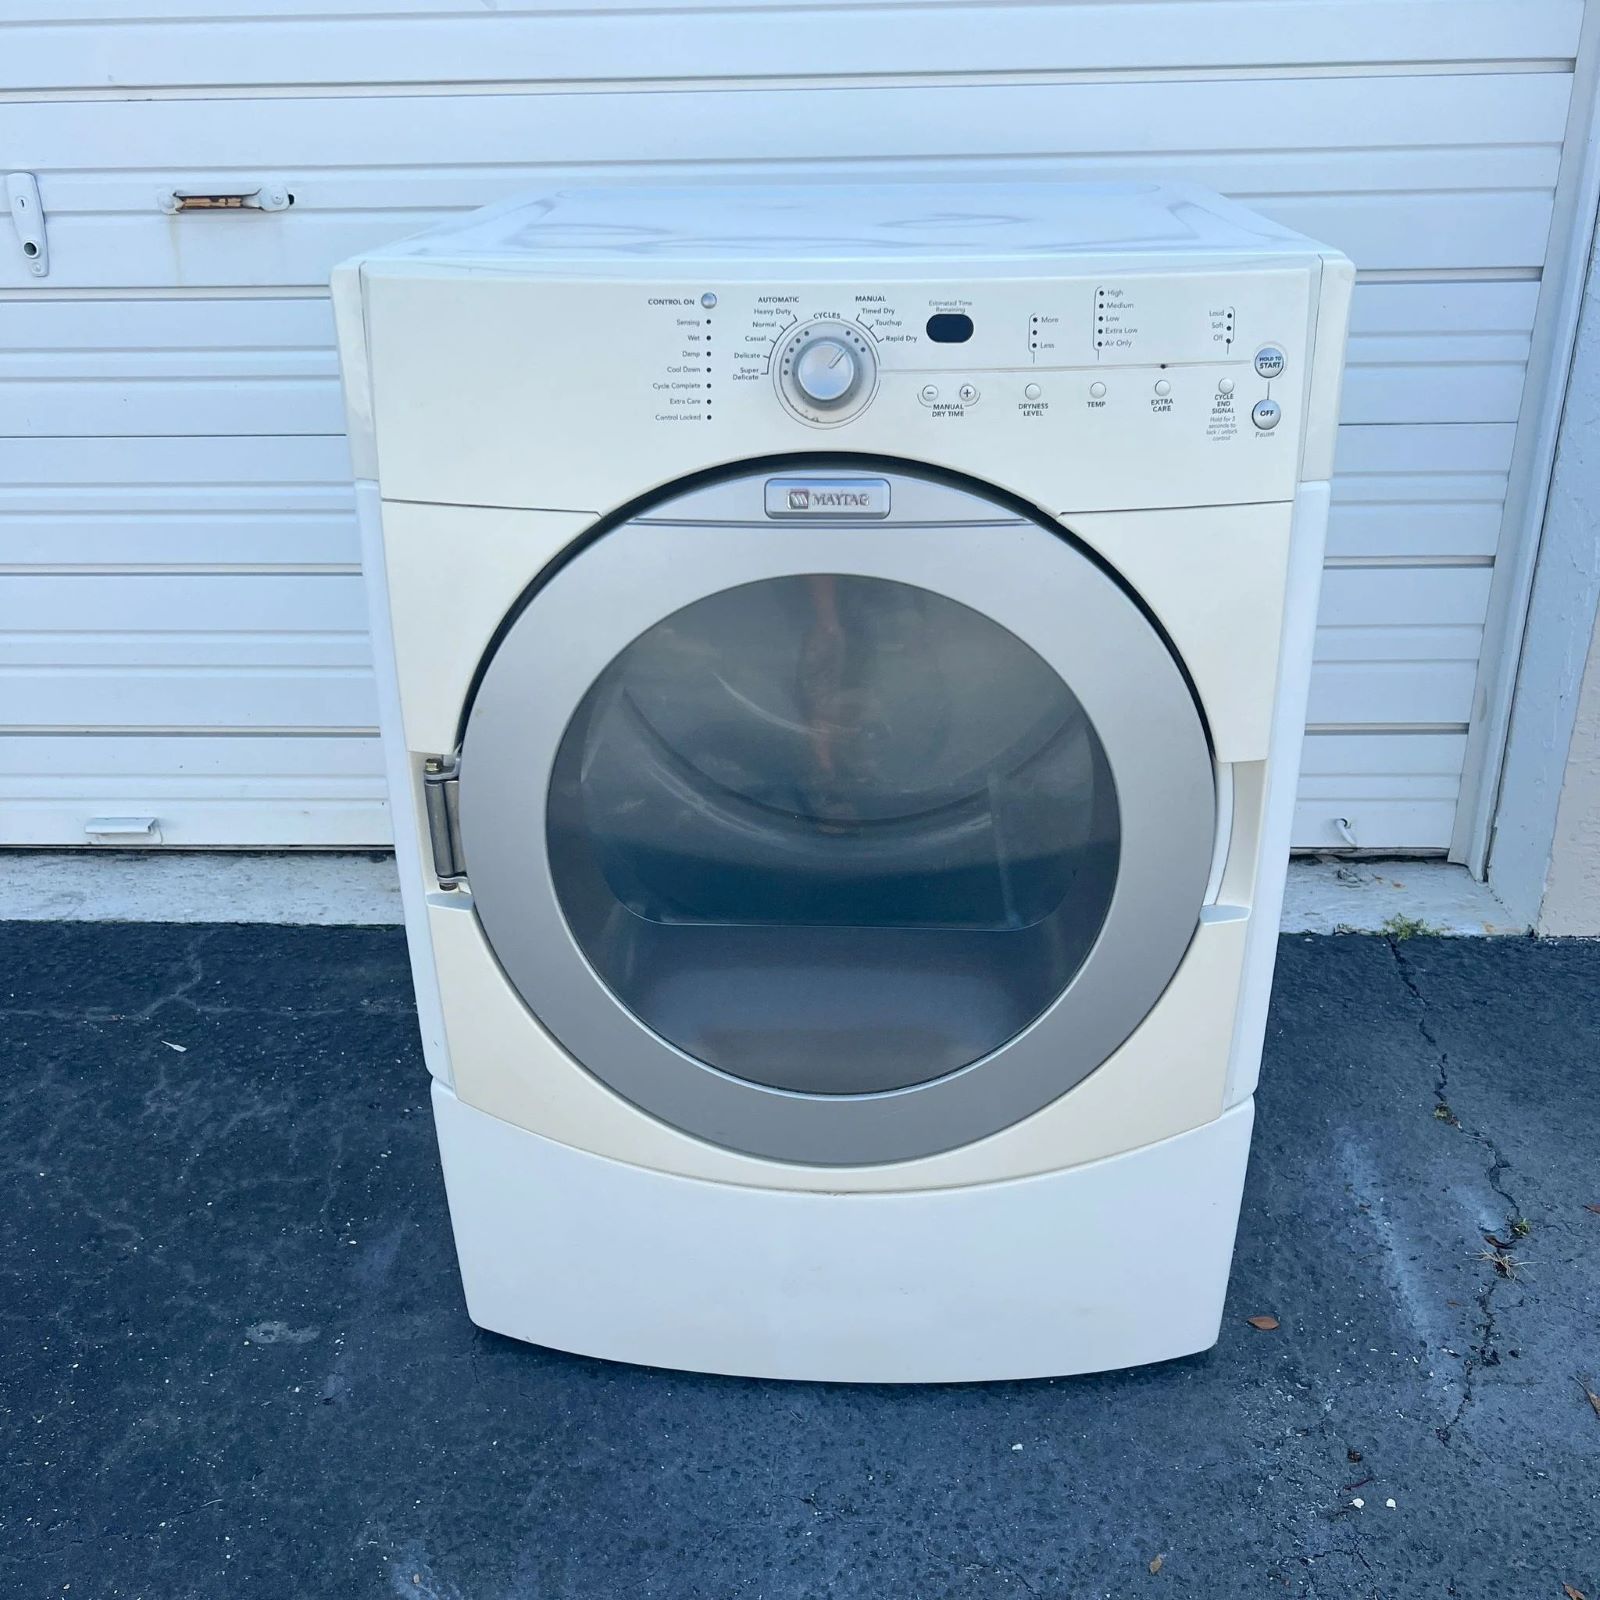 How To Fix The Error Code F23 For Maytag Dryer